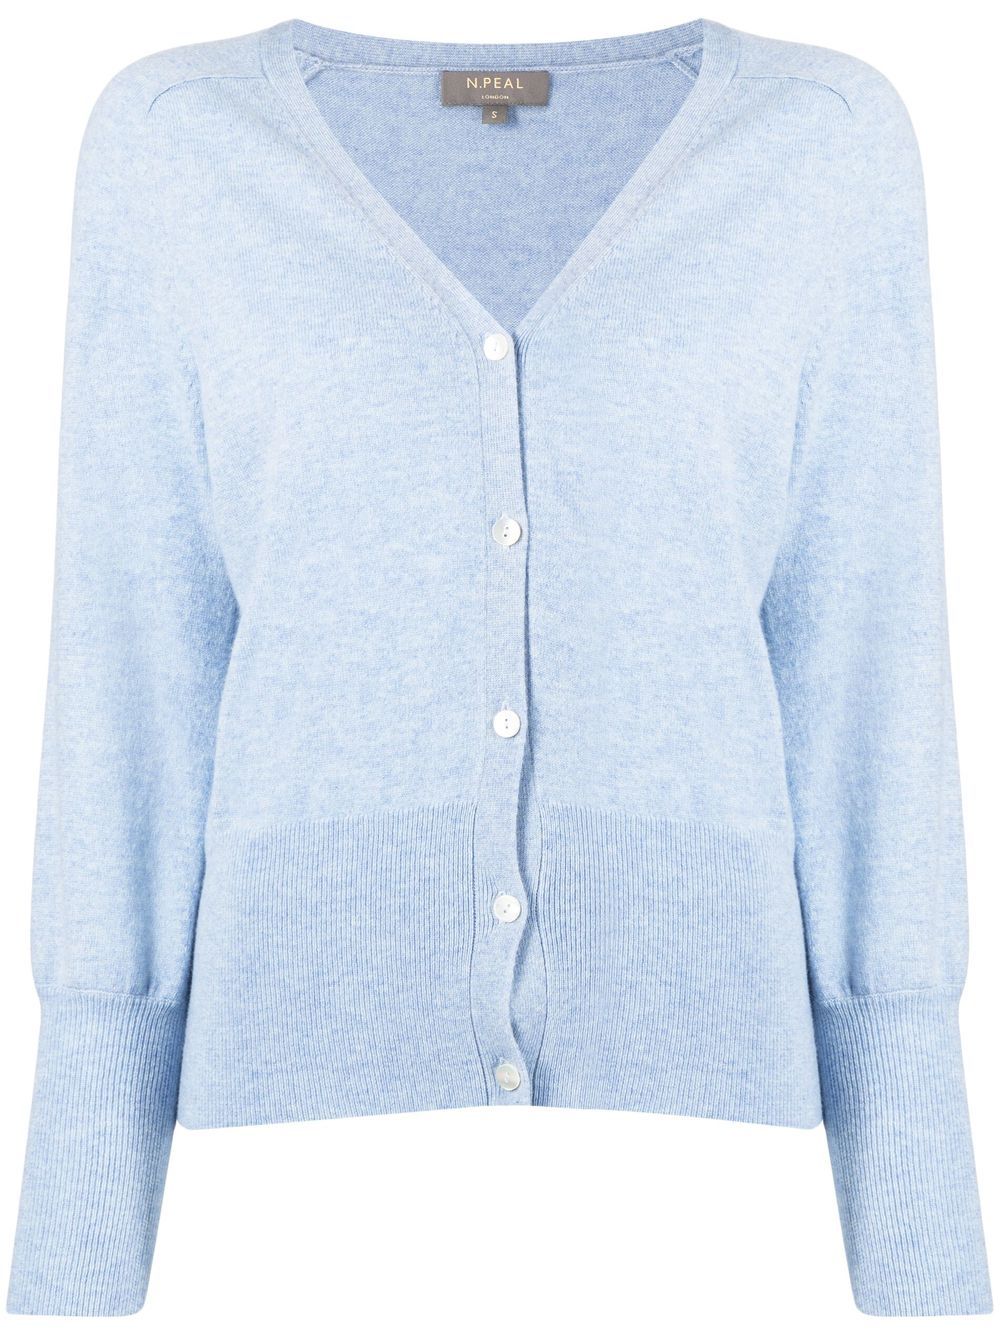 N.Peal knitted organic cashmere cardigan - Blue von N.Peal